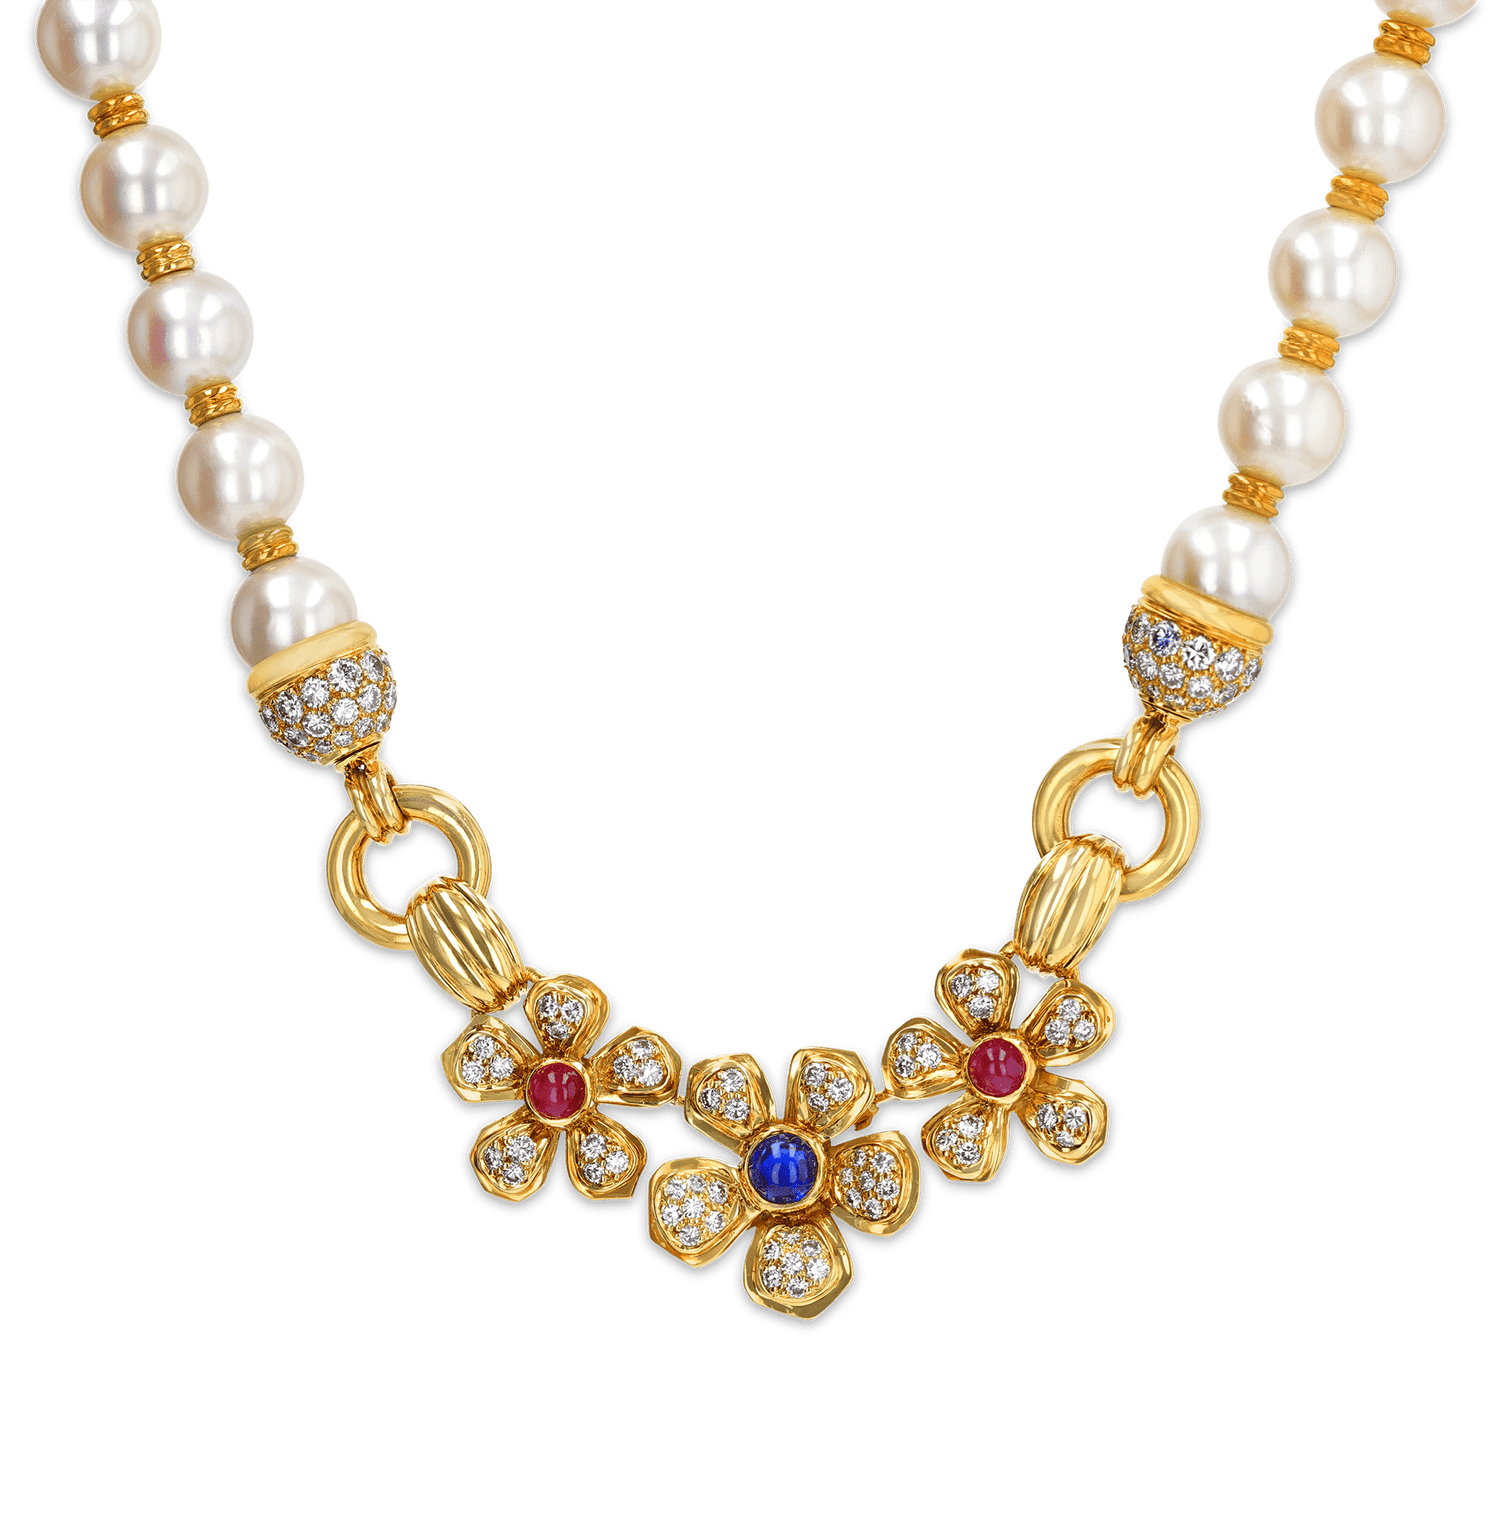 Diamond and Pearl Floral Necklace